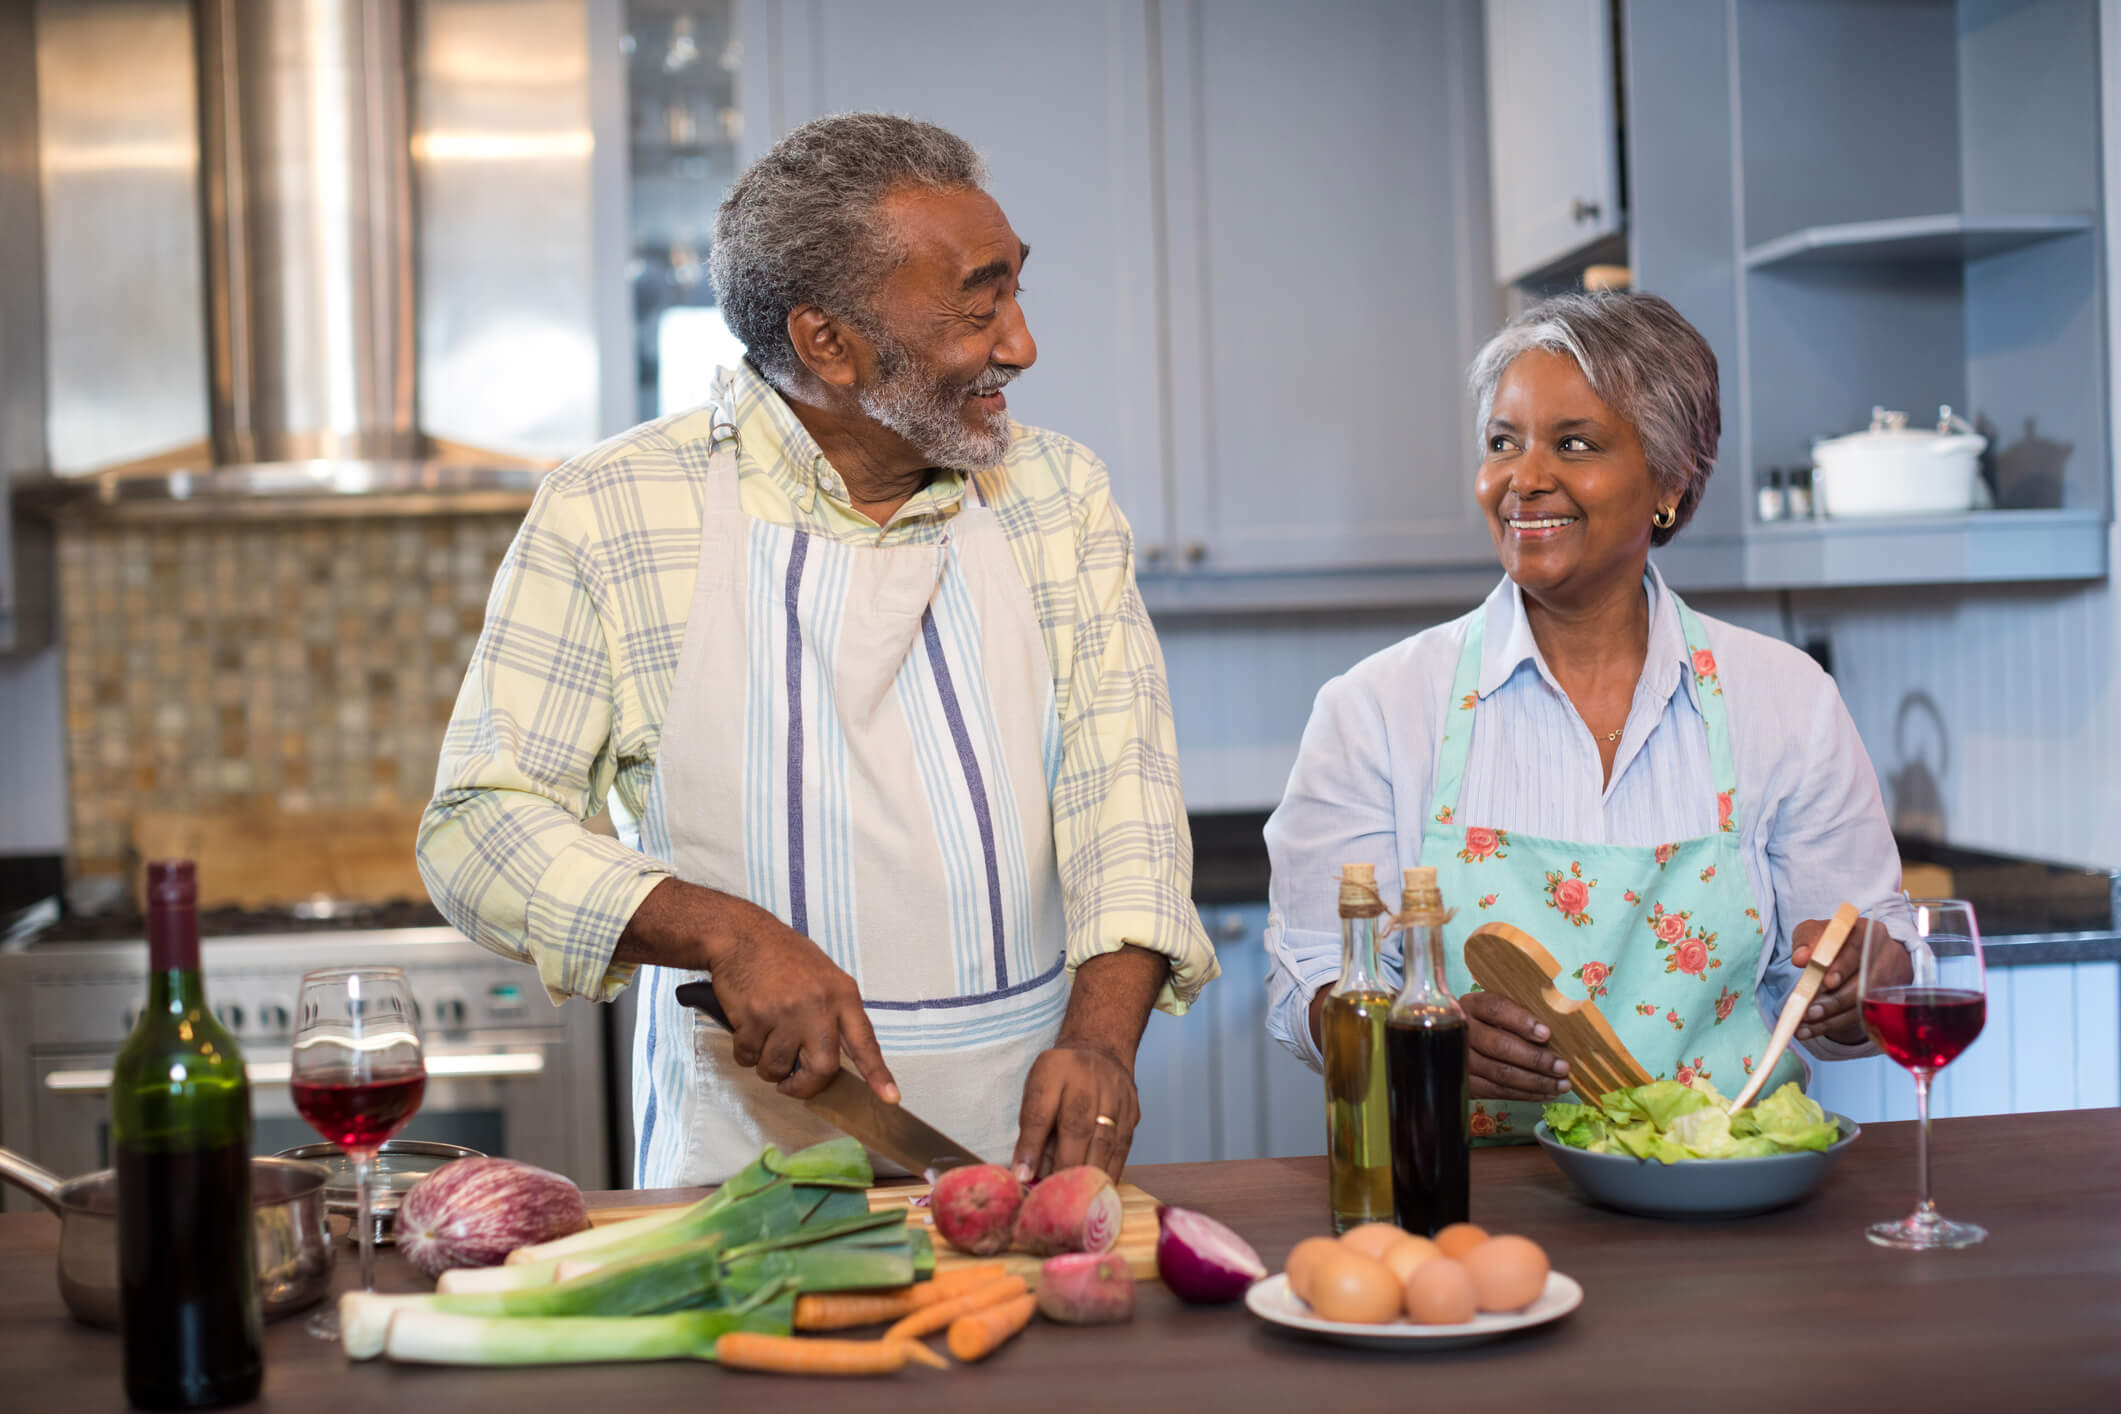 Image of next post - 5 Diet and Nutrition Tips for Seniors